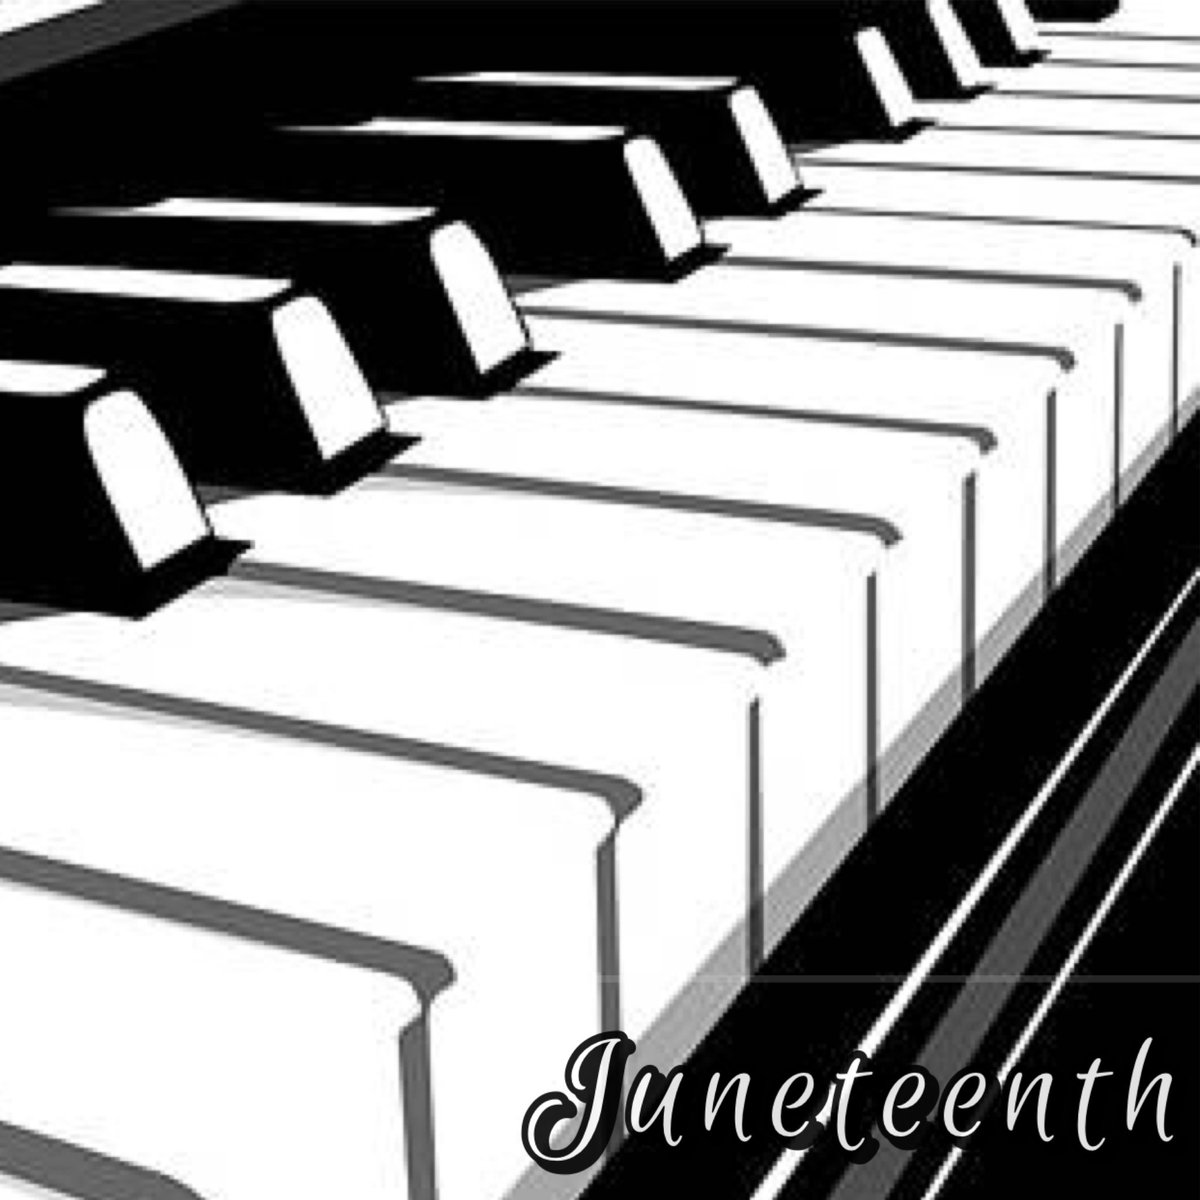 🎶🎹Ebony & Ivory🎹🎶

Ebony and ivory live together in perfect harmony 
Side by side on my piano keyboard, oh Lord why don't we?

📝🎤 Paul McCartney 
🎤Featuring Stevie Wonder
1982

#JuneteenthCelebration
#June191865 
#AllBlackMenAndWomenLearnTheTruth